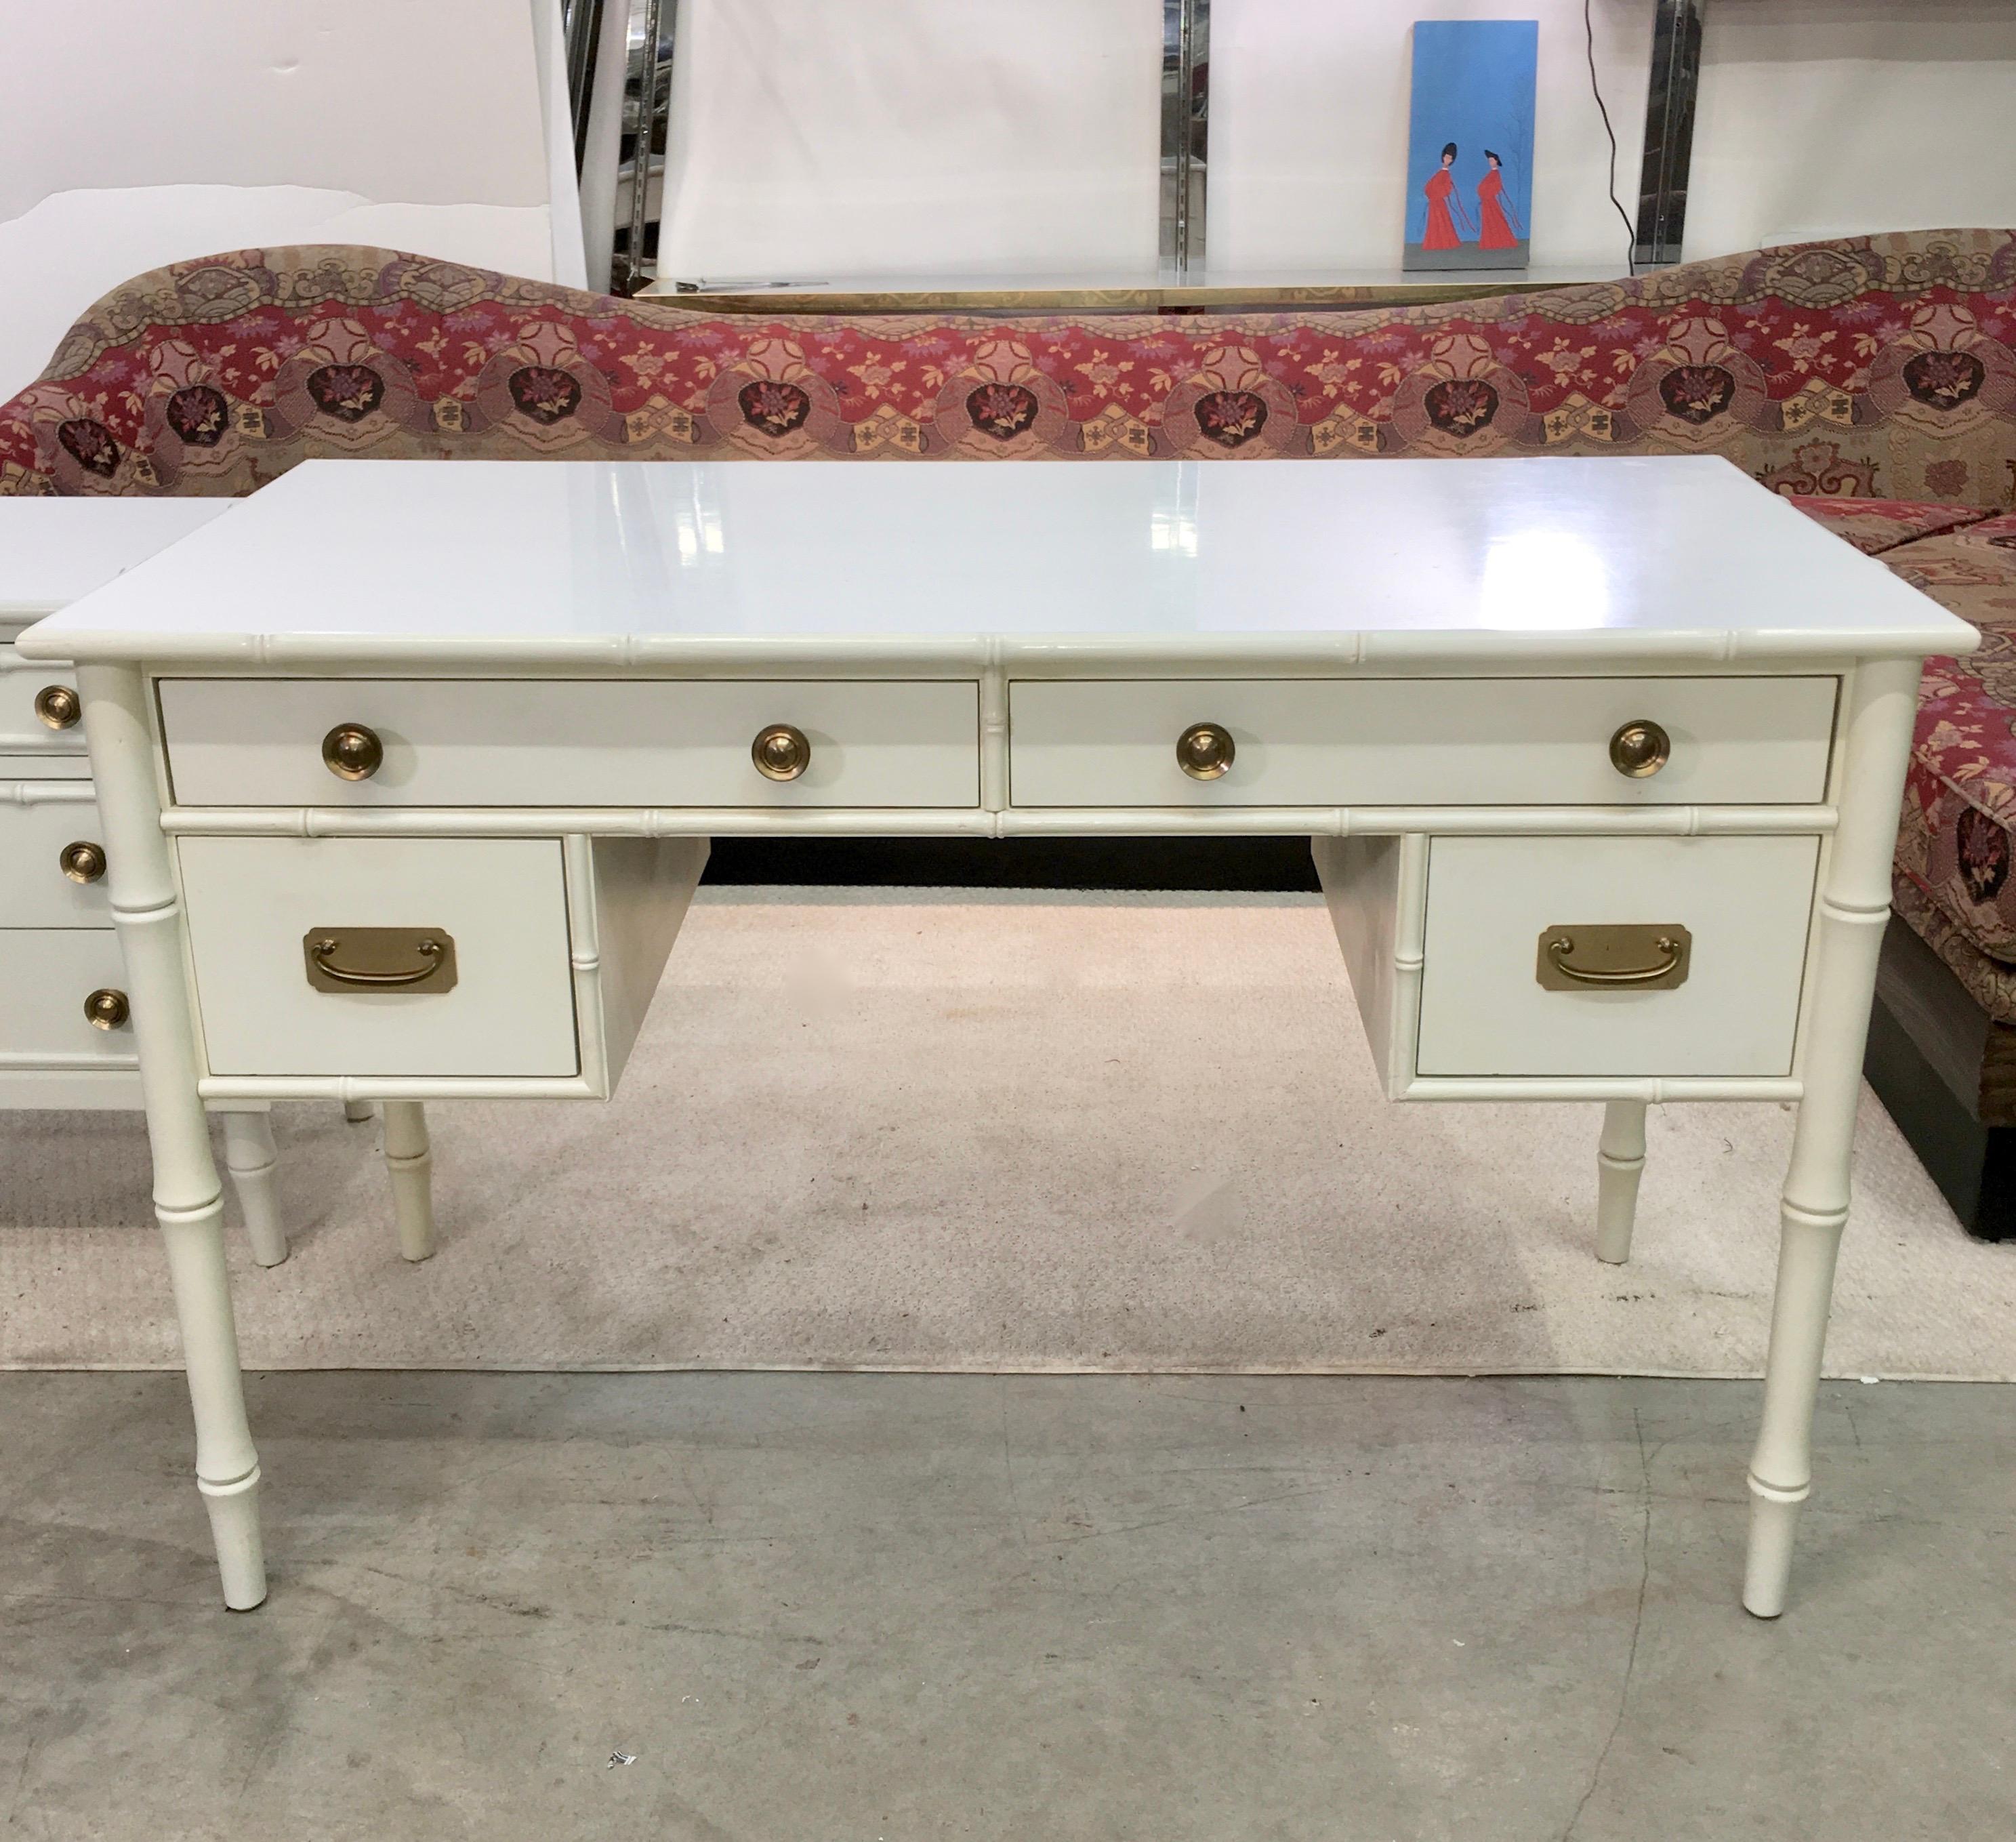 Upmarket vintage 1960s Hollywood Regency faux bamboo painted wood desk attributed to Ficks Reed. White laminate top and posh solid brass hardware. Four drawers. Kneehole 24.5